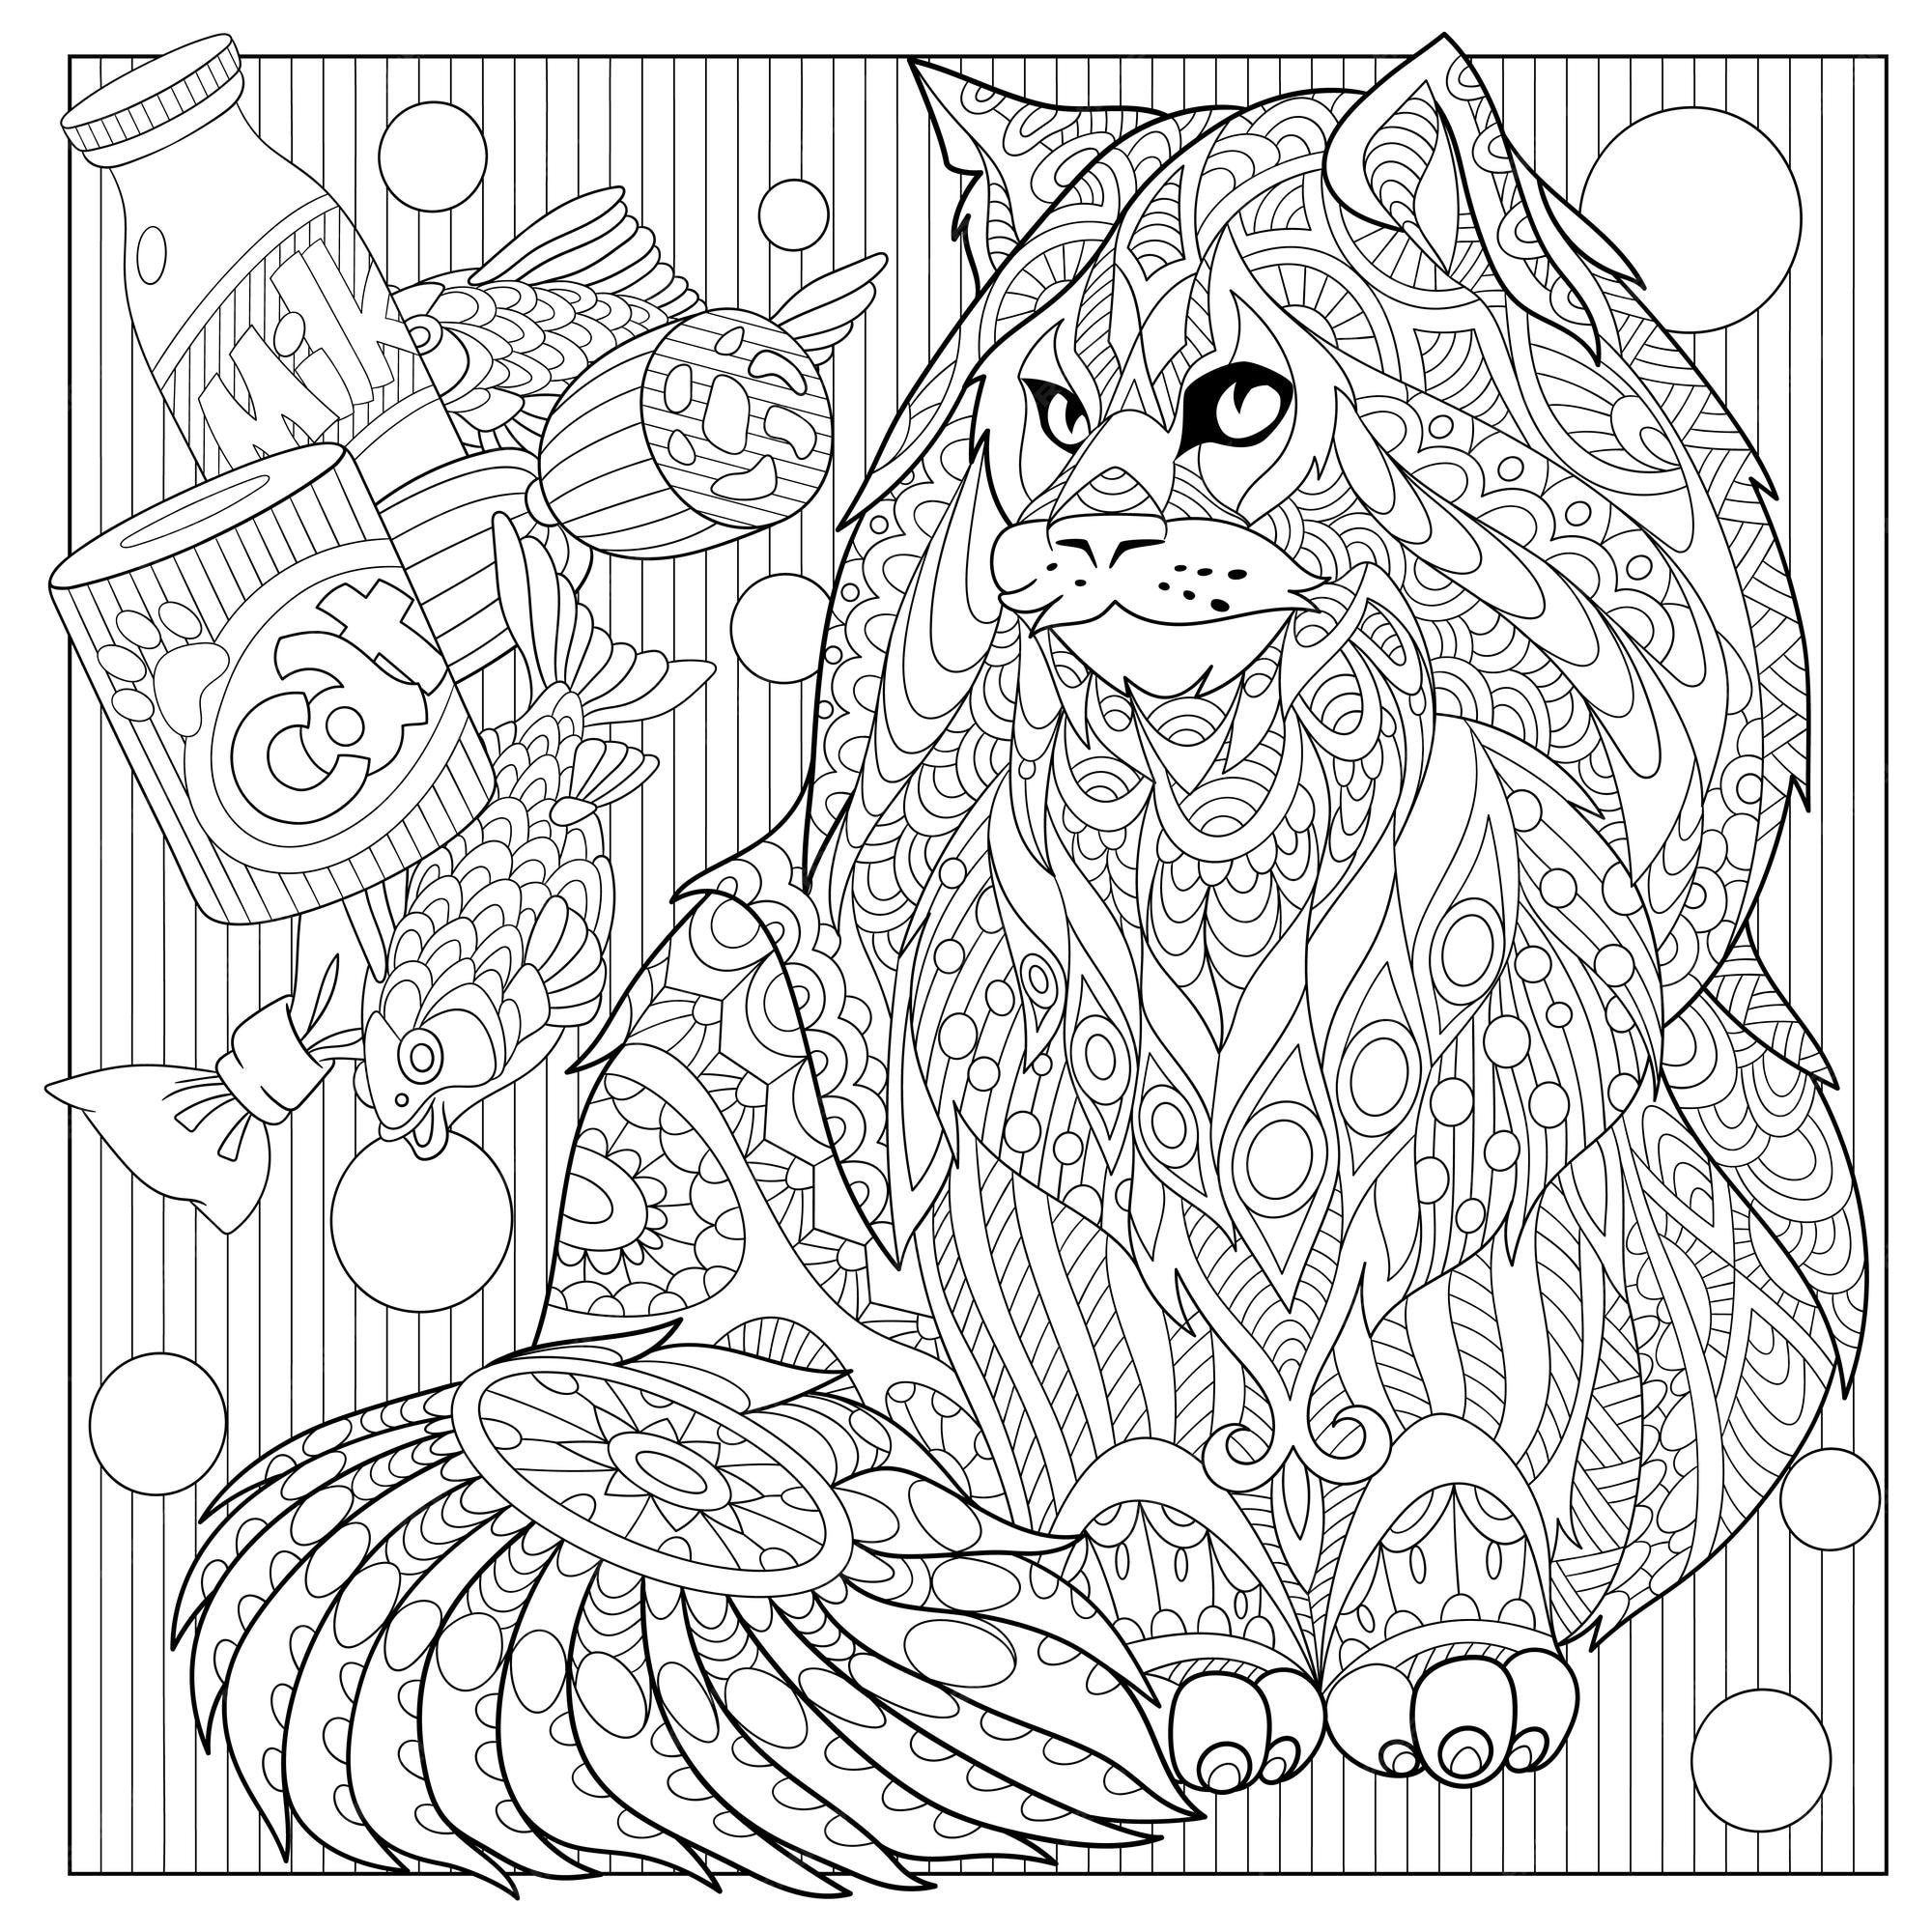 Premium vector maine coon cat zentangle colouring illustration line art design for adult coloring book page